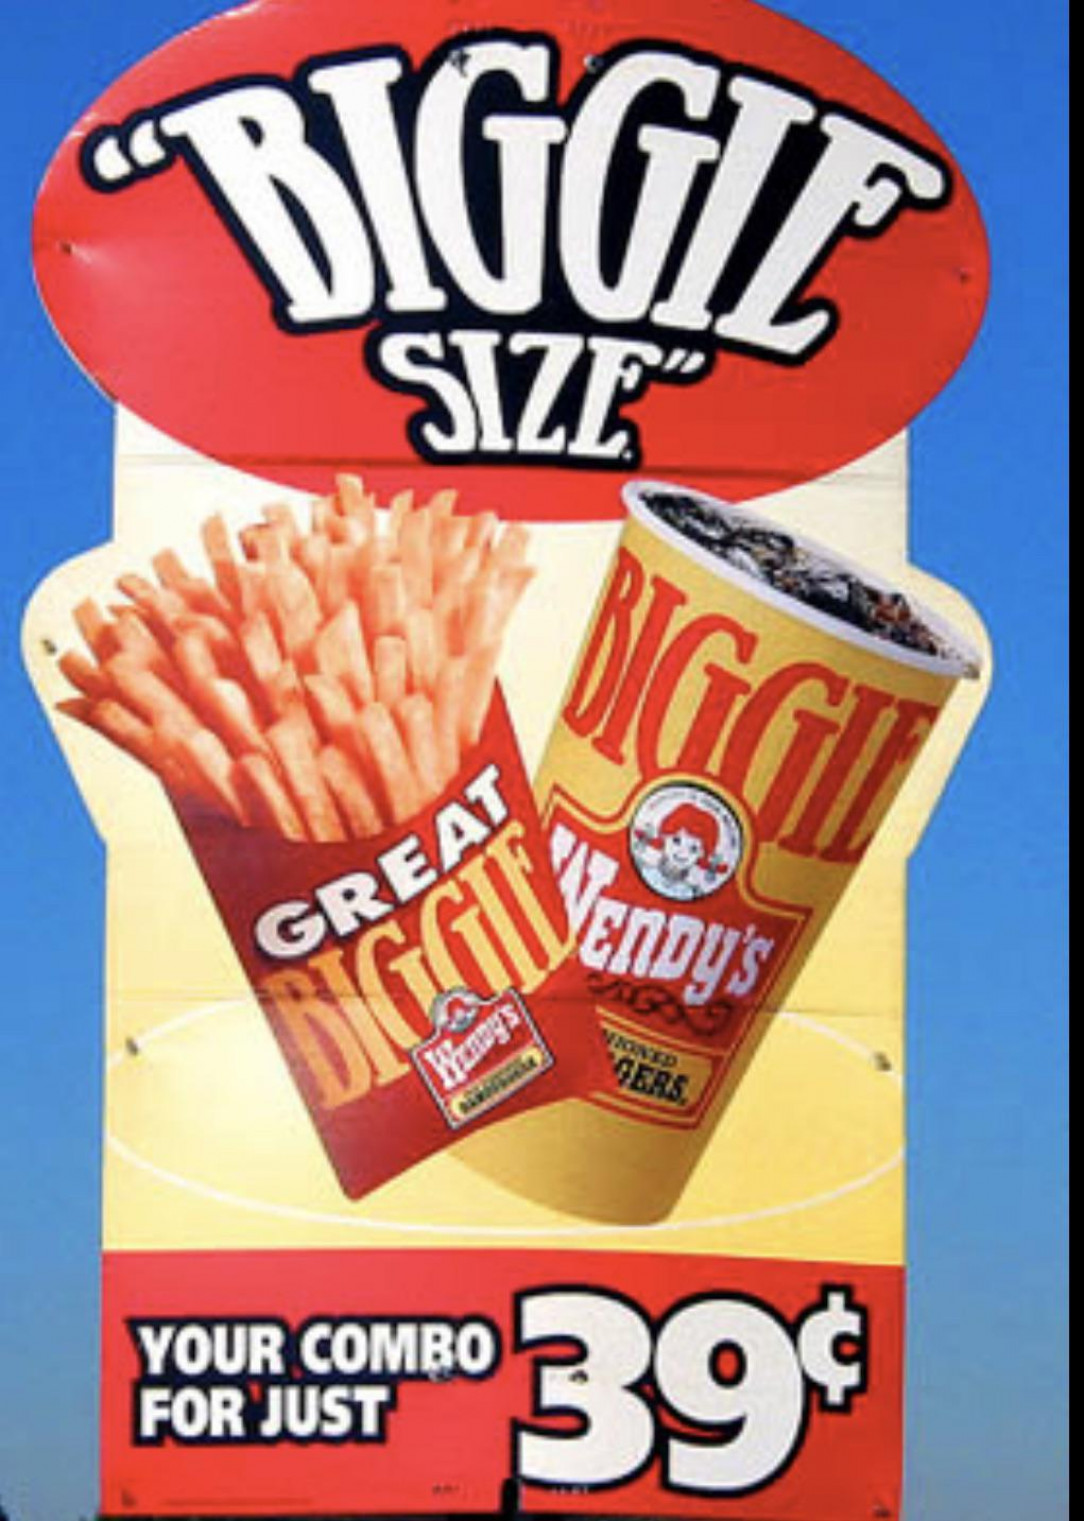 Remember when you could Biggie Size your combo for just 39 cents? !